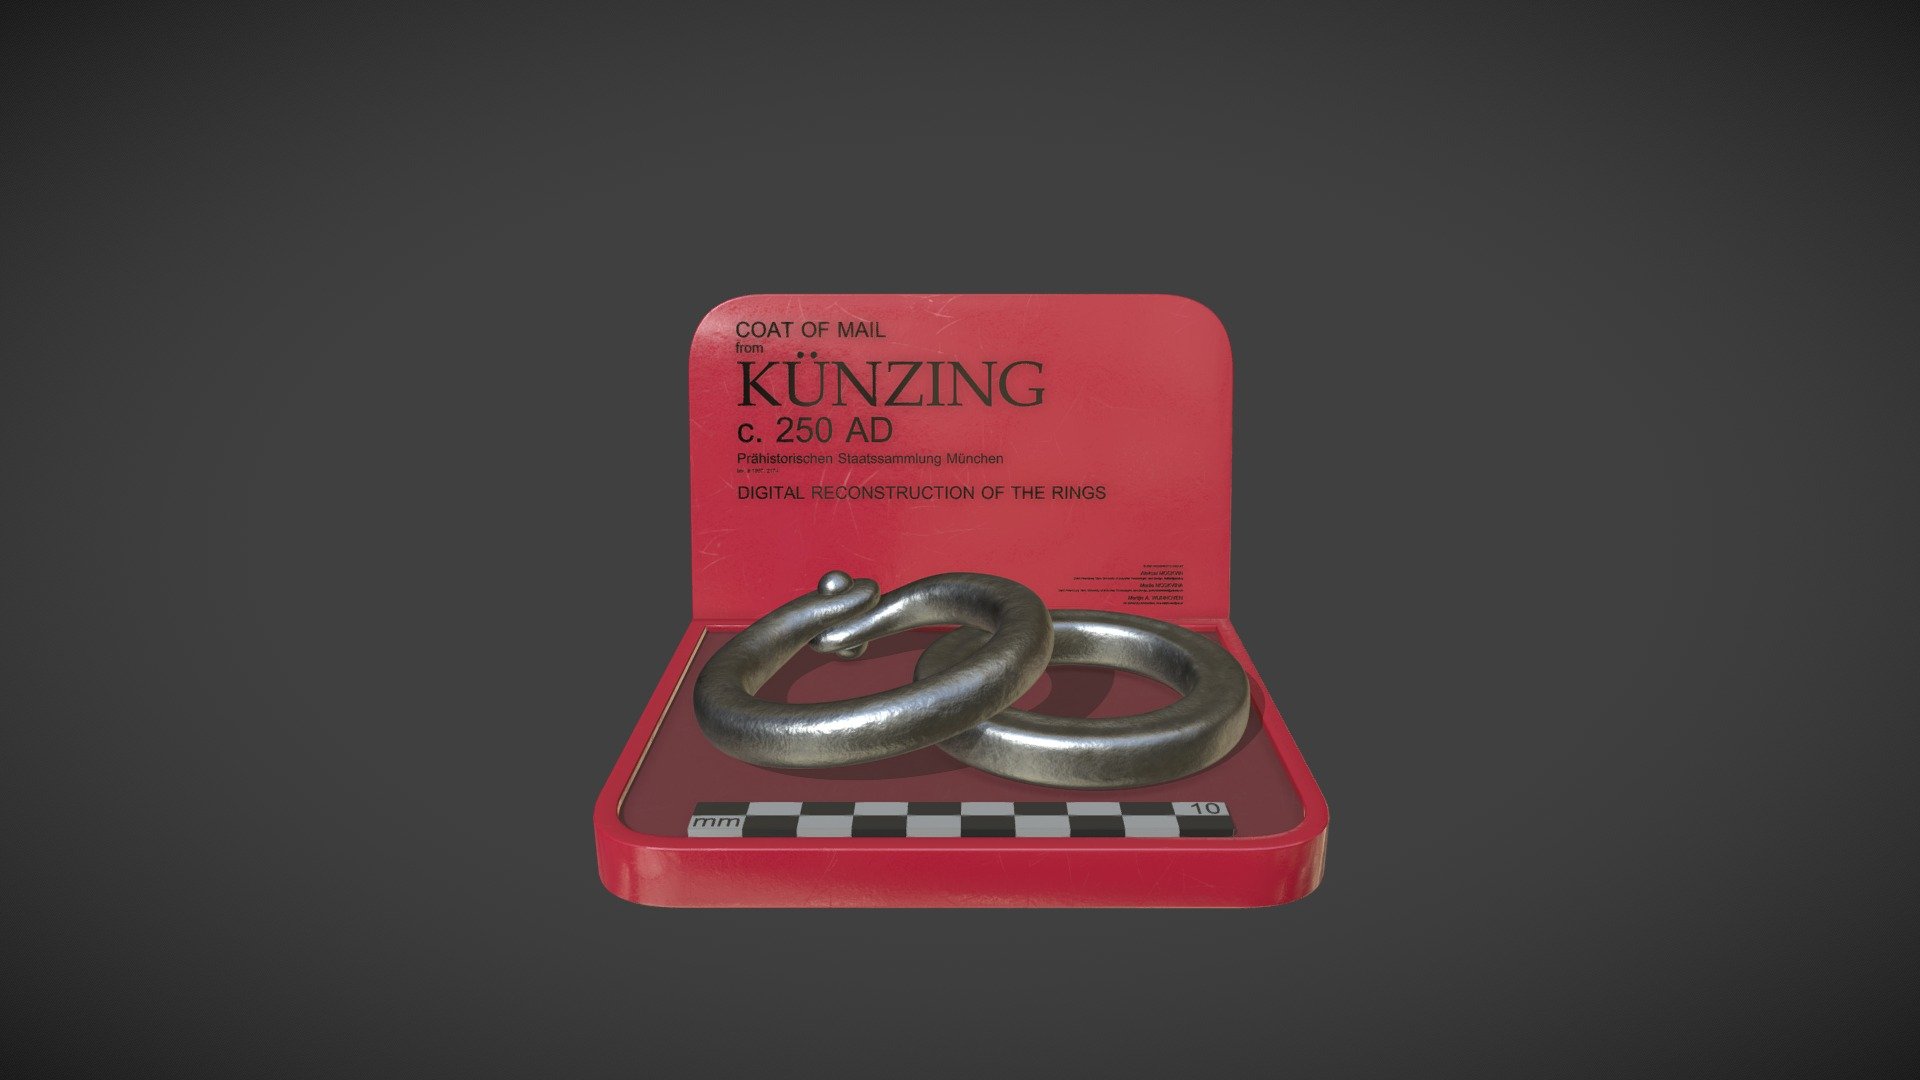 The 3D model presents a digital reconstruction of solid and riveted rings of archaeological mail armour. To create 3D models of the rings, we used polygonal modelling functions of Blender software. In order to record the relevant measurements of the mail rings, we used a list of parameters. This list includes 11 parameters for a riveted ring and four parameters for a solid ring. The accuracy of the digital replicas of the rings was 0.01 mm. The authors of the reconstructions are 

Aleksei Moskvin (Saint Petersburg State University of Industrial Technologies and Design) 
https://independent.academia.edu/AlekseiMoskvin

Mariia Moskvina (Saint Petersburg State University of Industrial Technologies and Design) https://independent.academia.edu/MariiaMoskvina

and Martijn A. Wijnhoven (VU University Amsterdam) 
https://vu-nl.academia.edu/MartijnAWijnhoven 

DOI: https://doi.org/10.13140/RG.2.2.12294.50247 - Armour from Künzing: 3D reconstruction - Download Free 3D model by Aleksei Moskvin (@alekseimoskvin1) 3d model